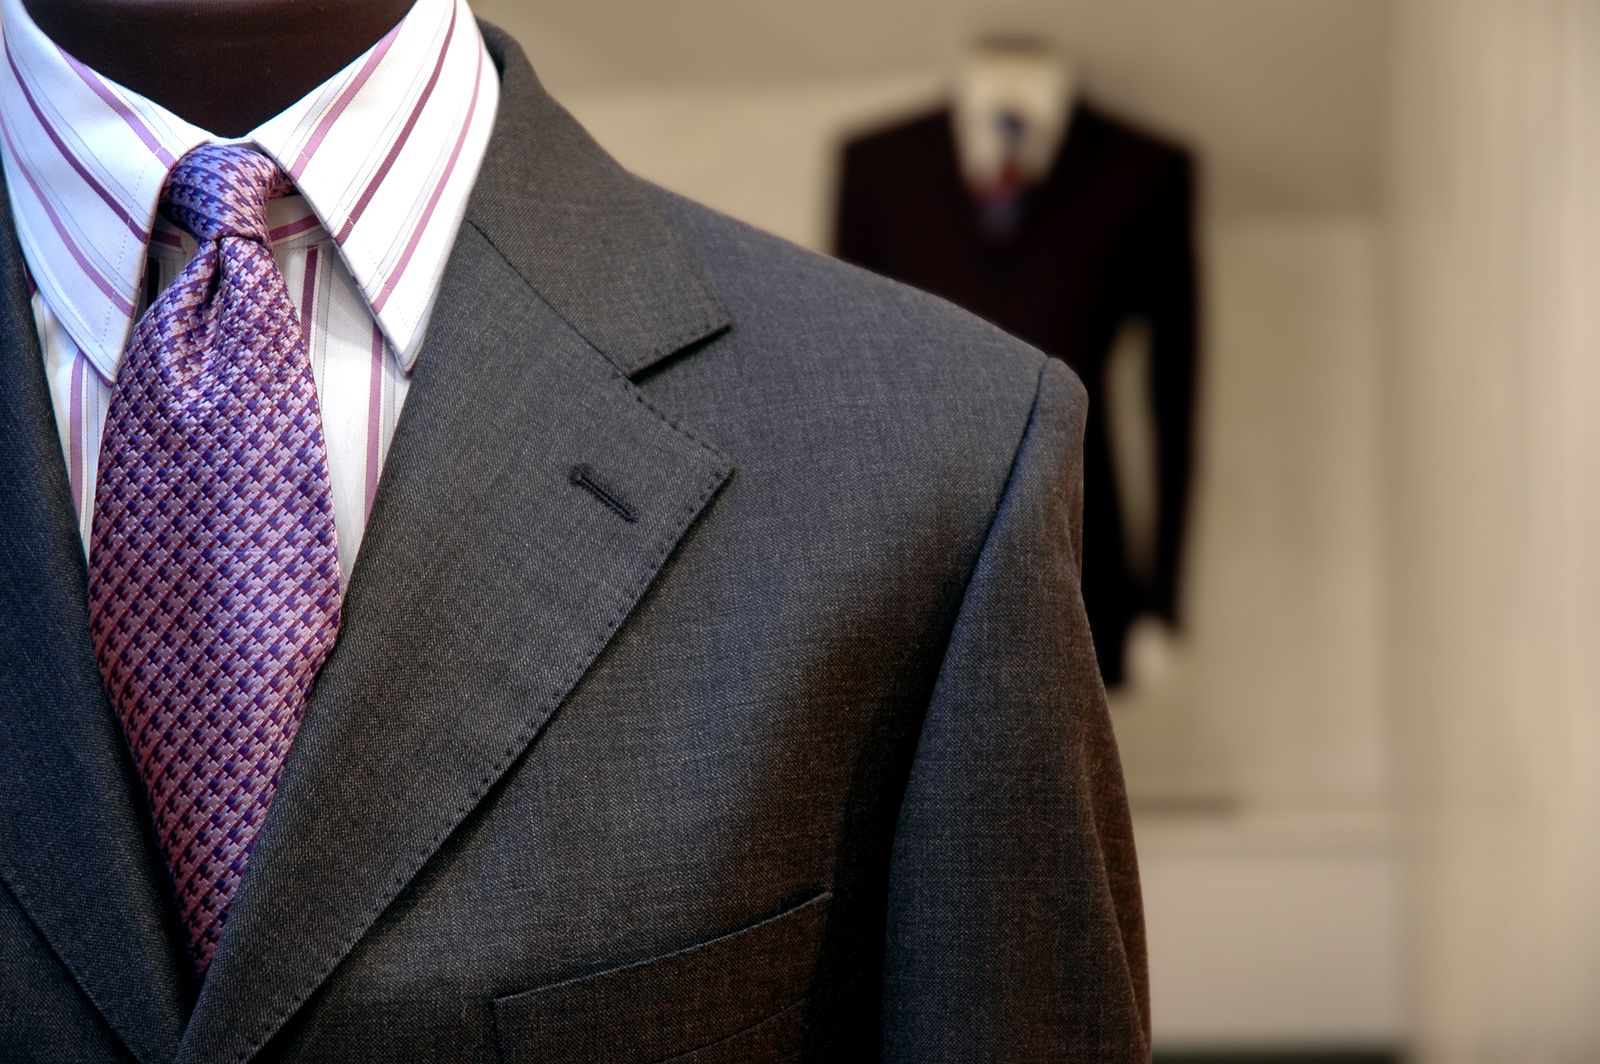 5 Differences Between Cheap And Expensive Men's Suits ($200 vs $2000 Suits)